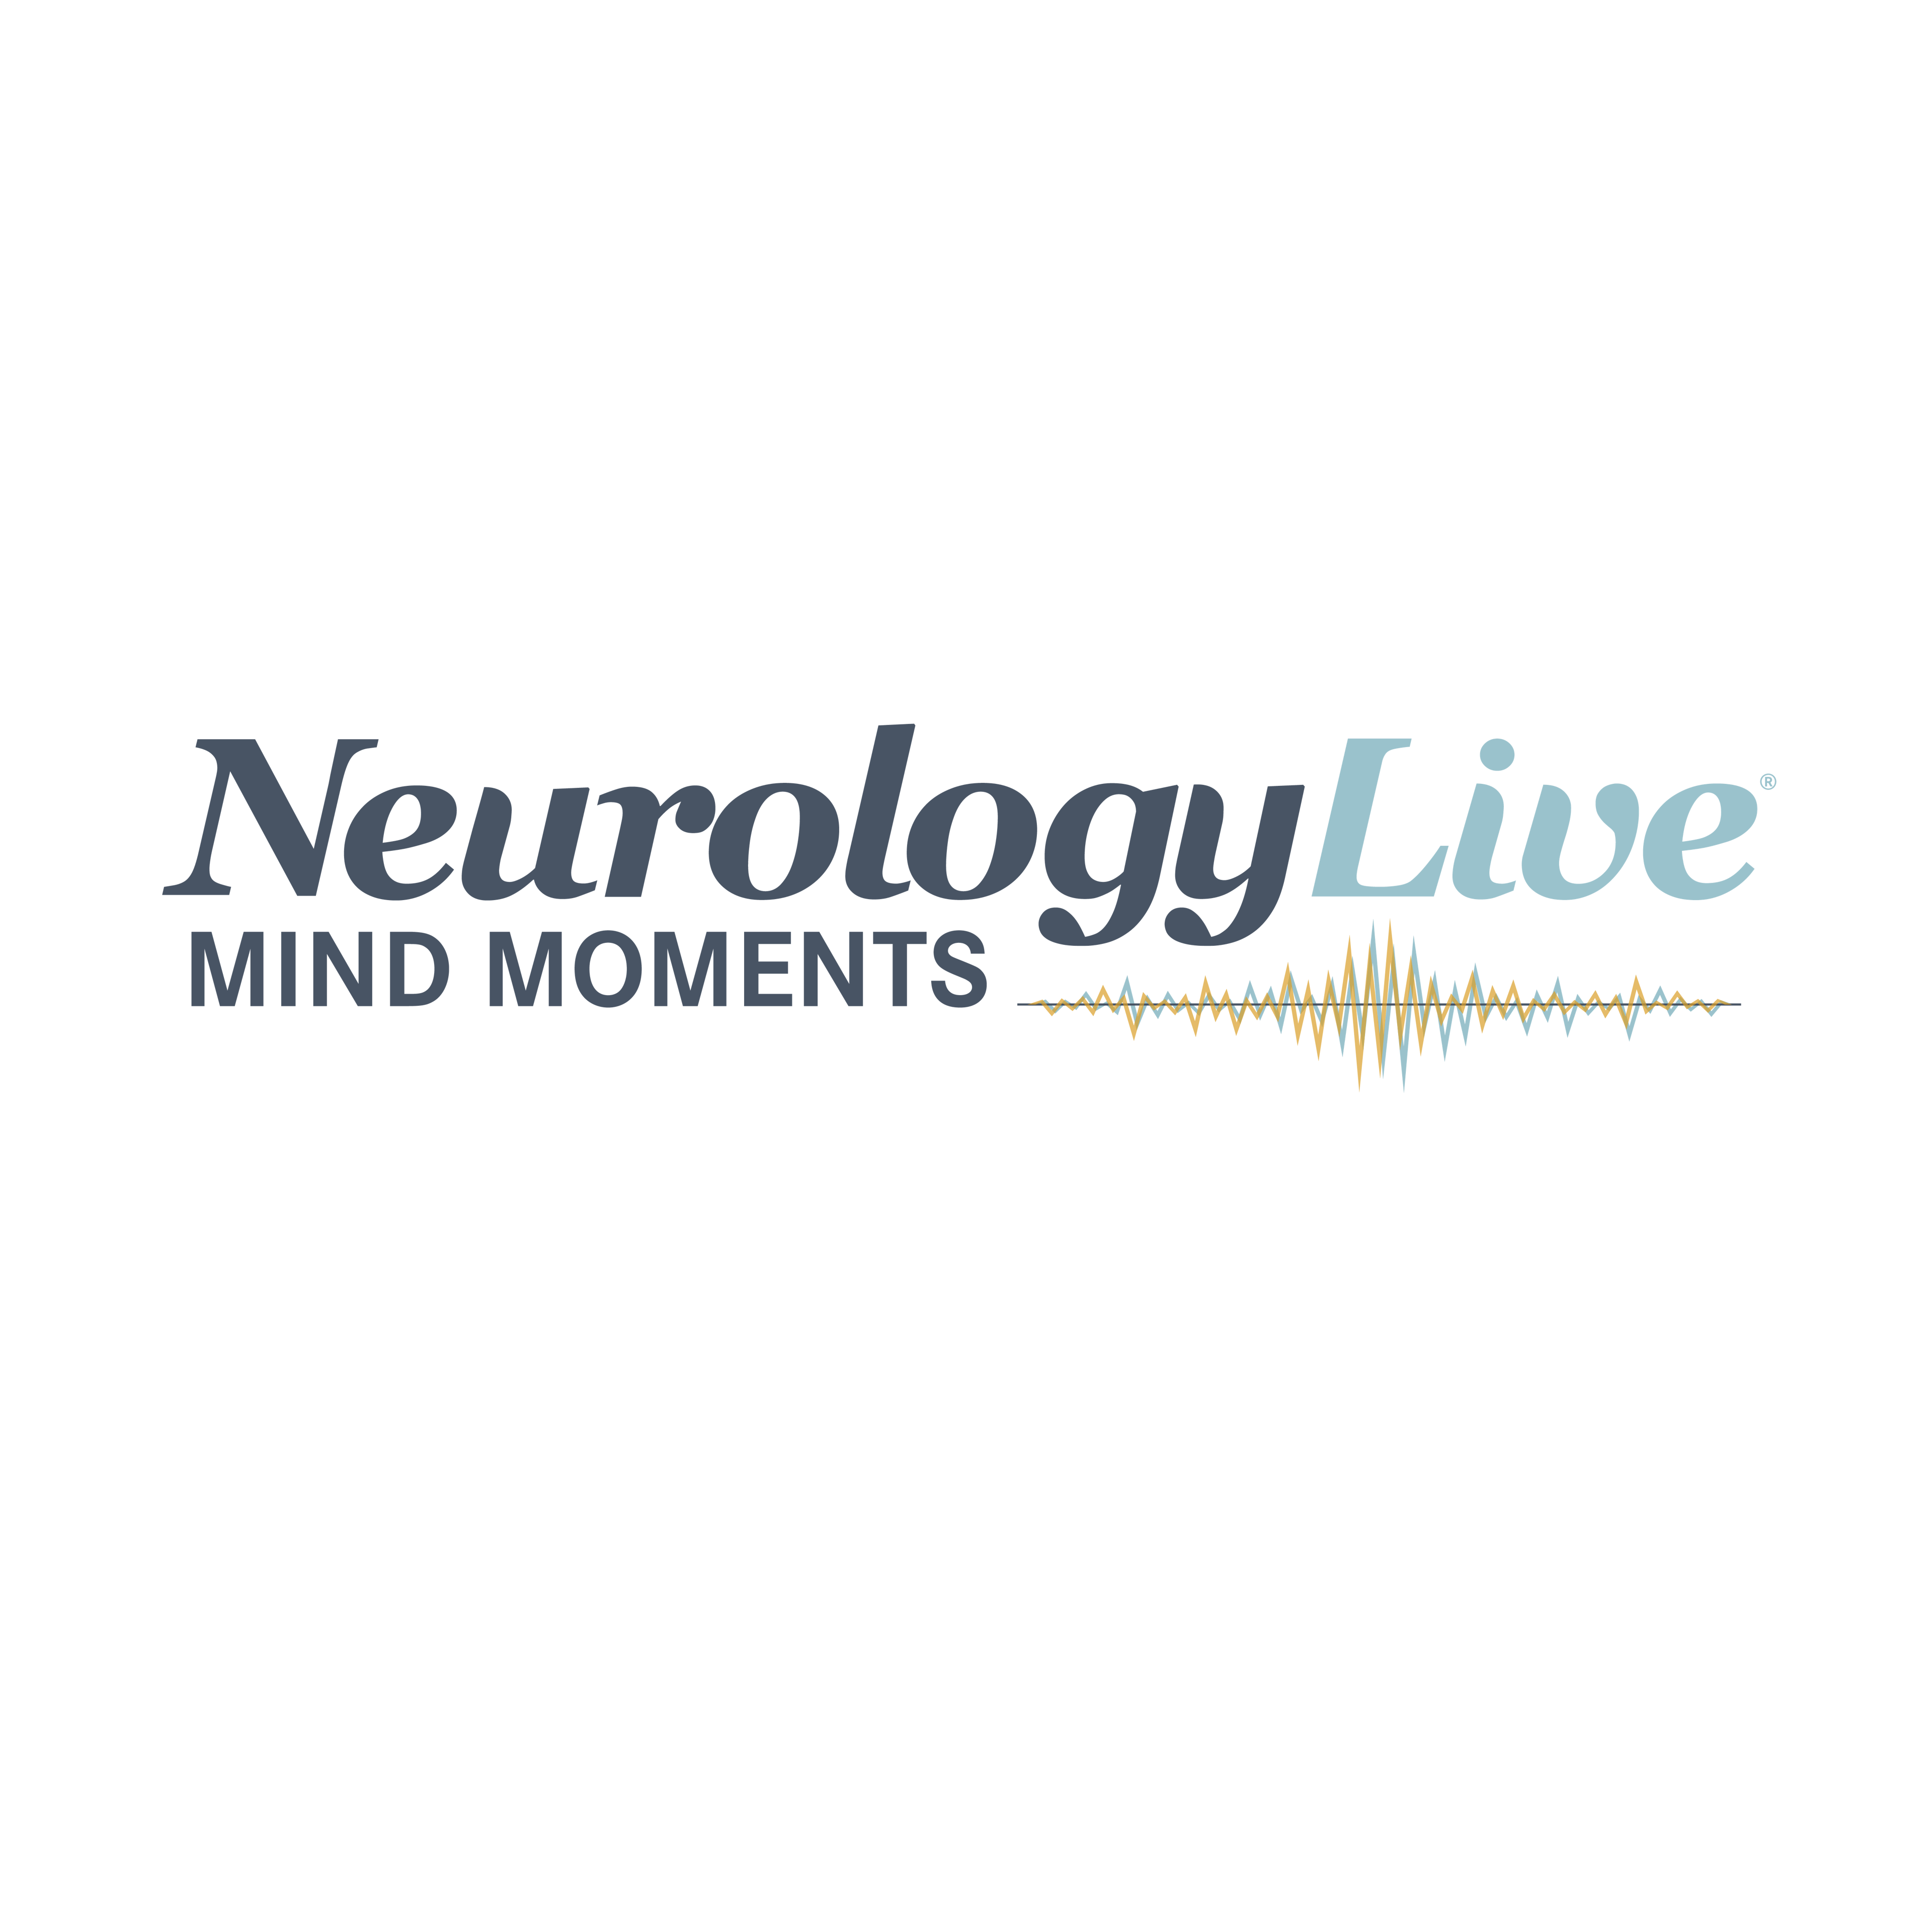 Episode 73: The Role of Palliative Care in Neurology